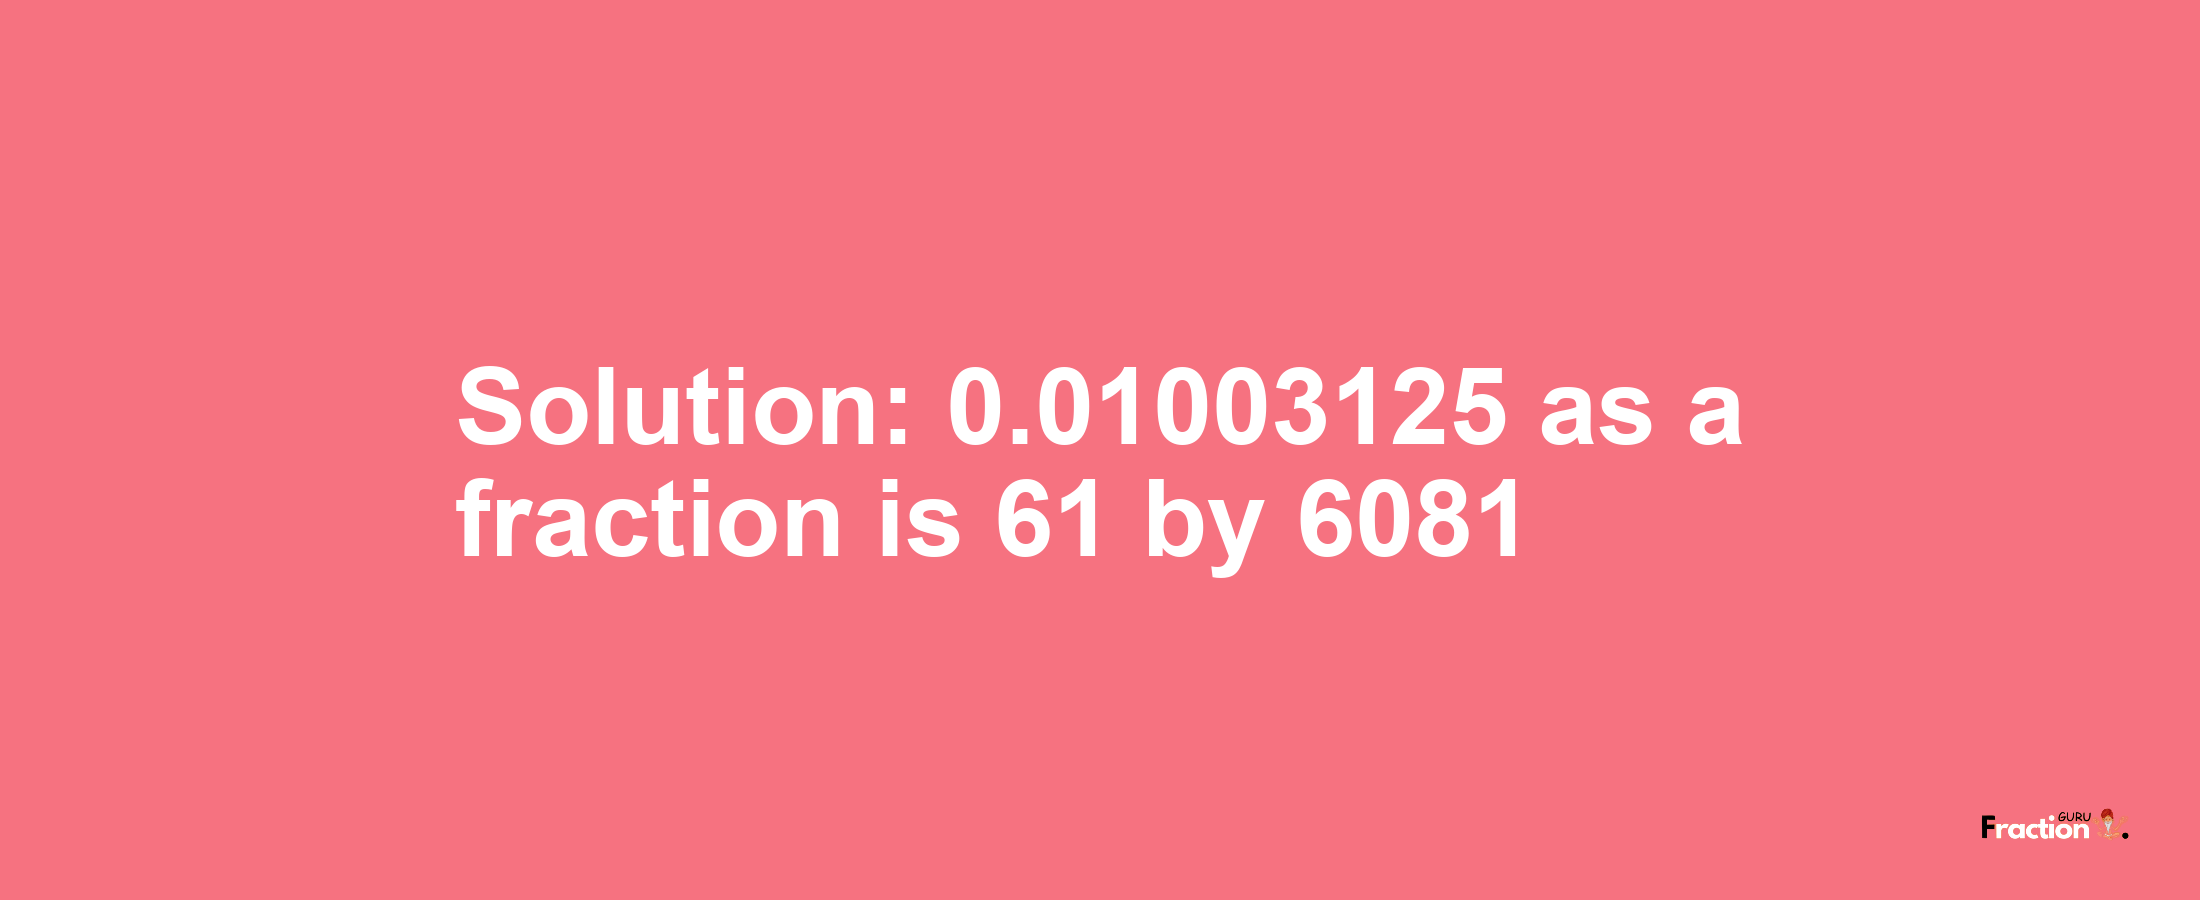 Solution:0.01003125 as a fraction is 61/6081